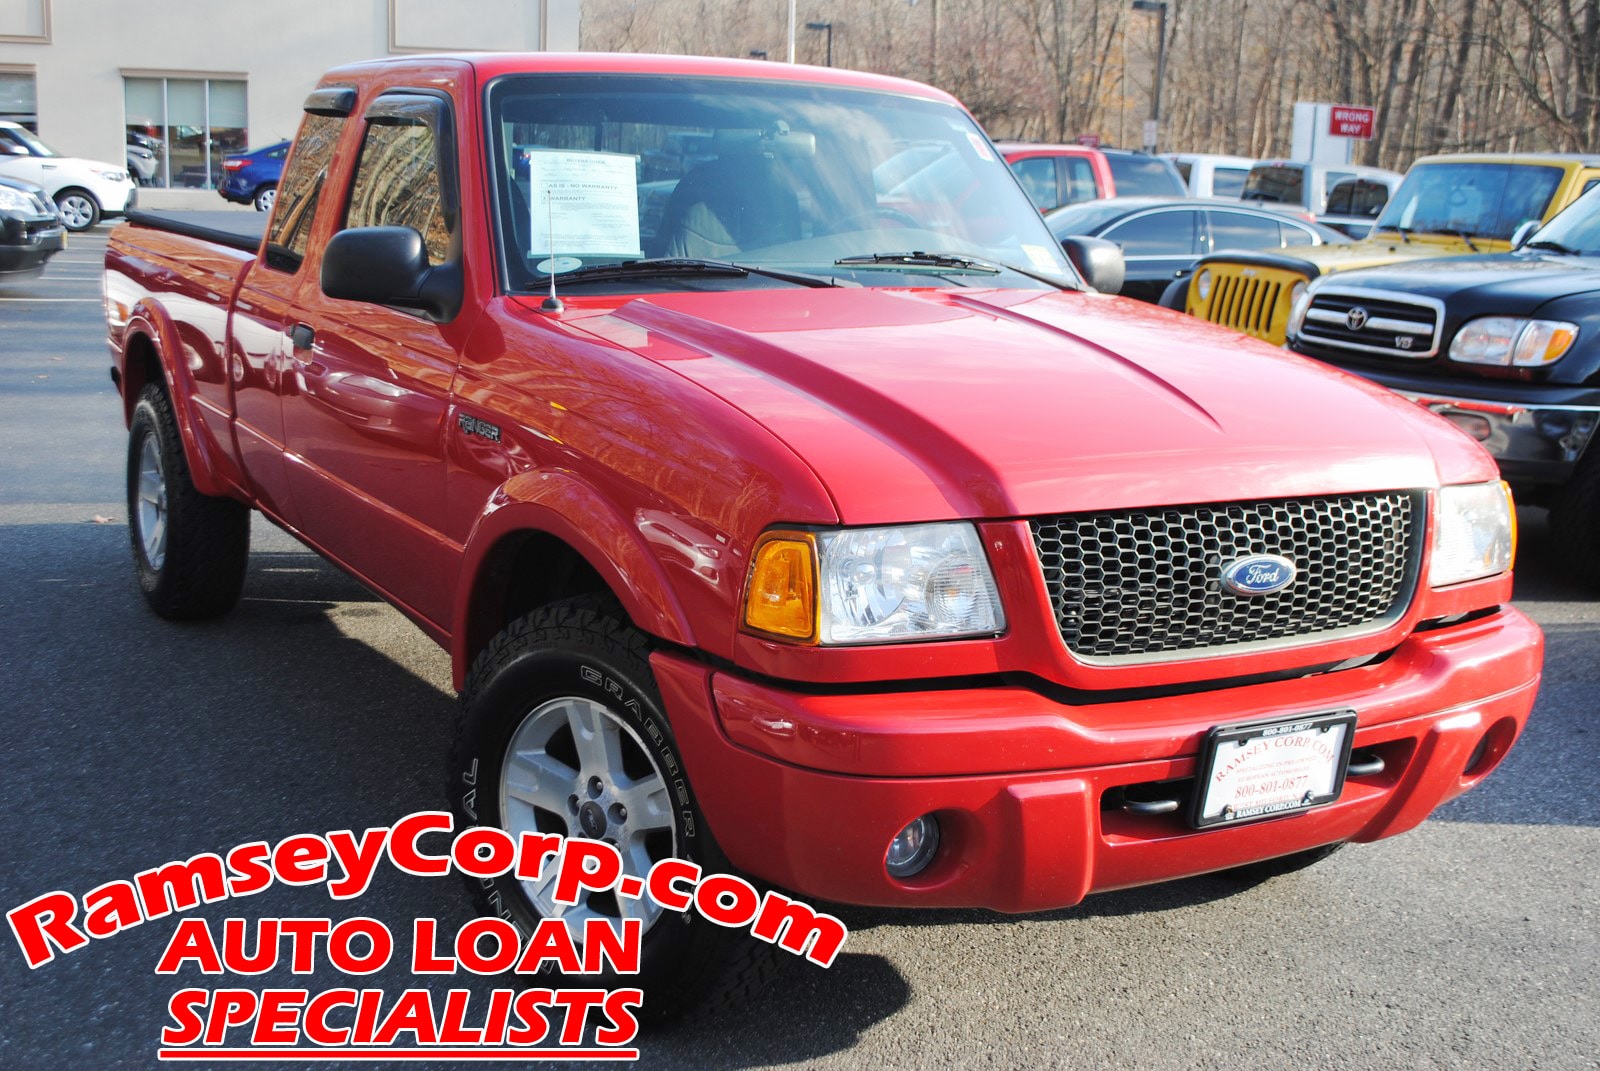 Used 2002 Ford Ranger For Sale at Ramsey Corp. | VIN: 1FTZR45E42TA56954